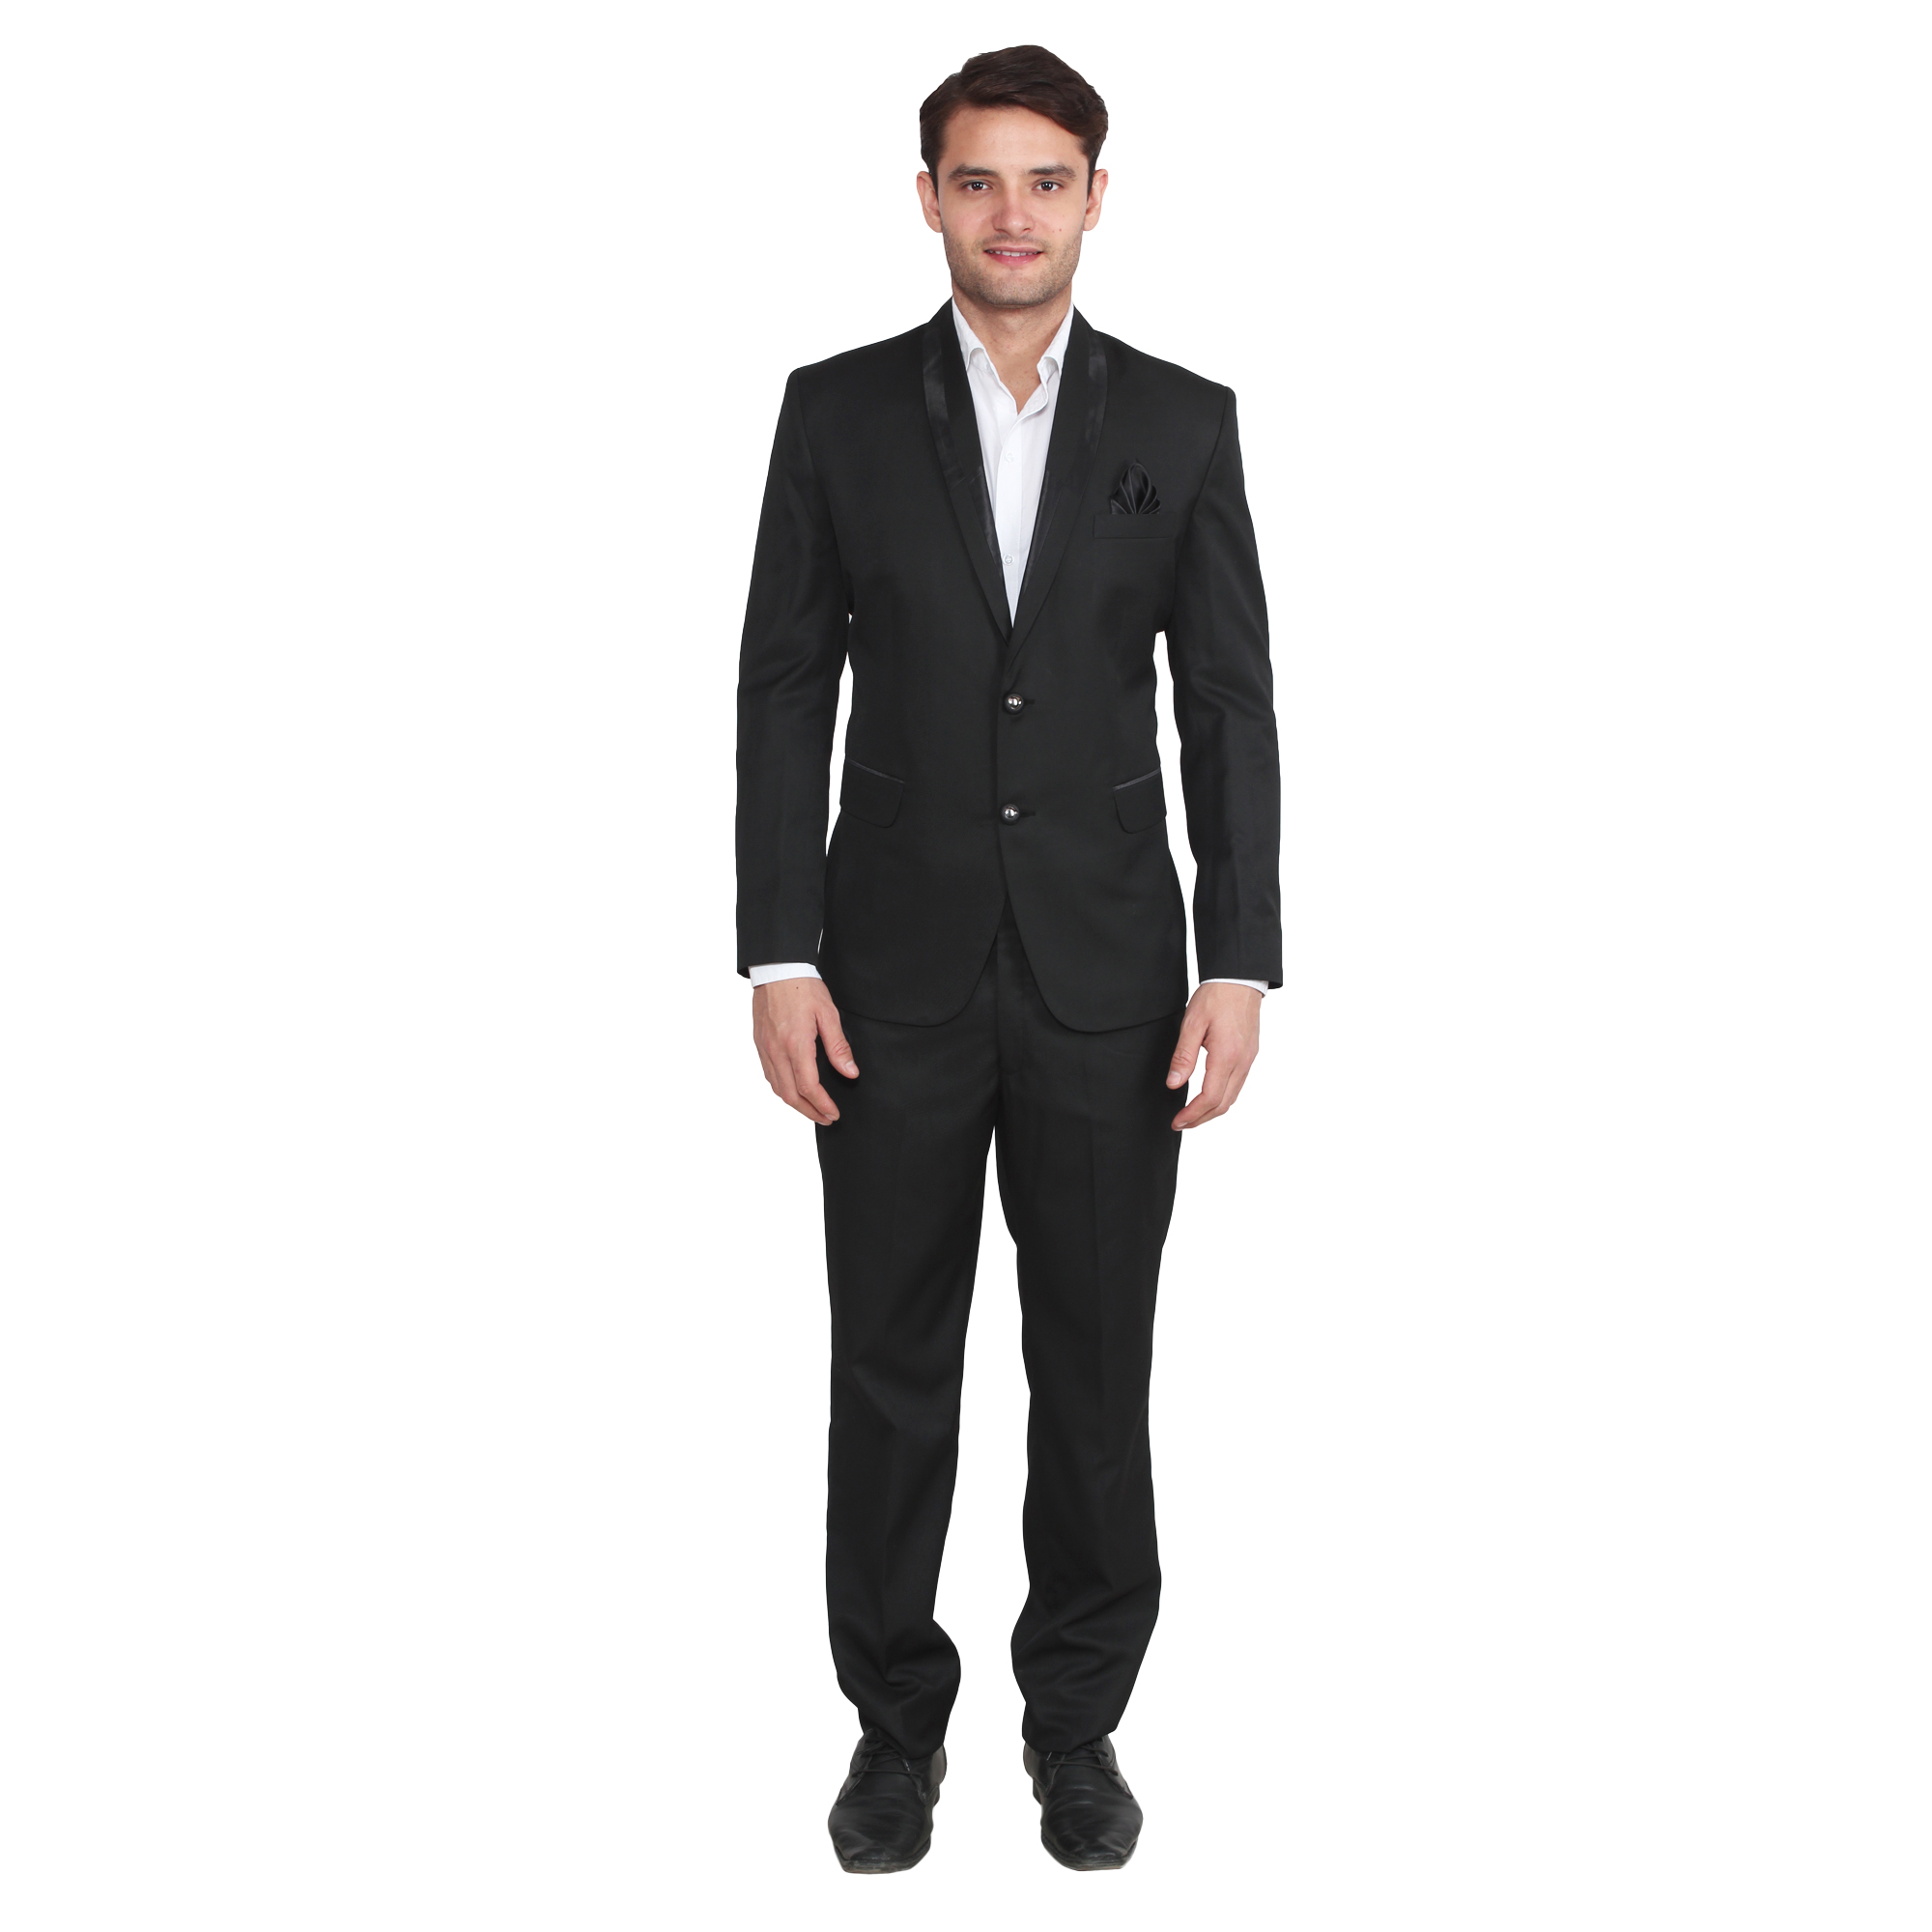 Buy Hangup Mens Solid Formal Black Suits Online @ ₹2100 from ShopClues